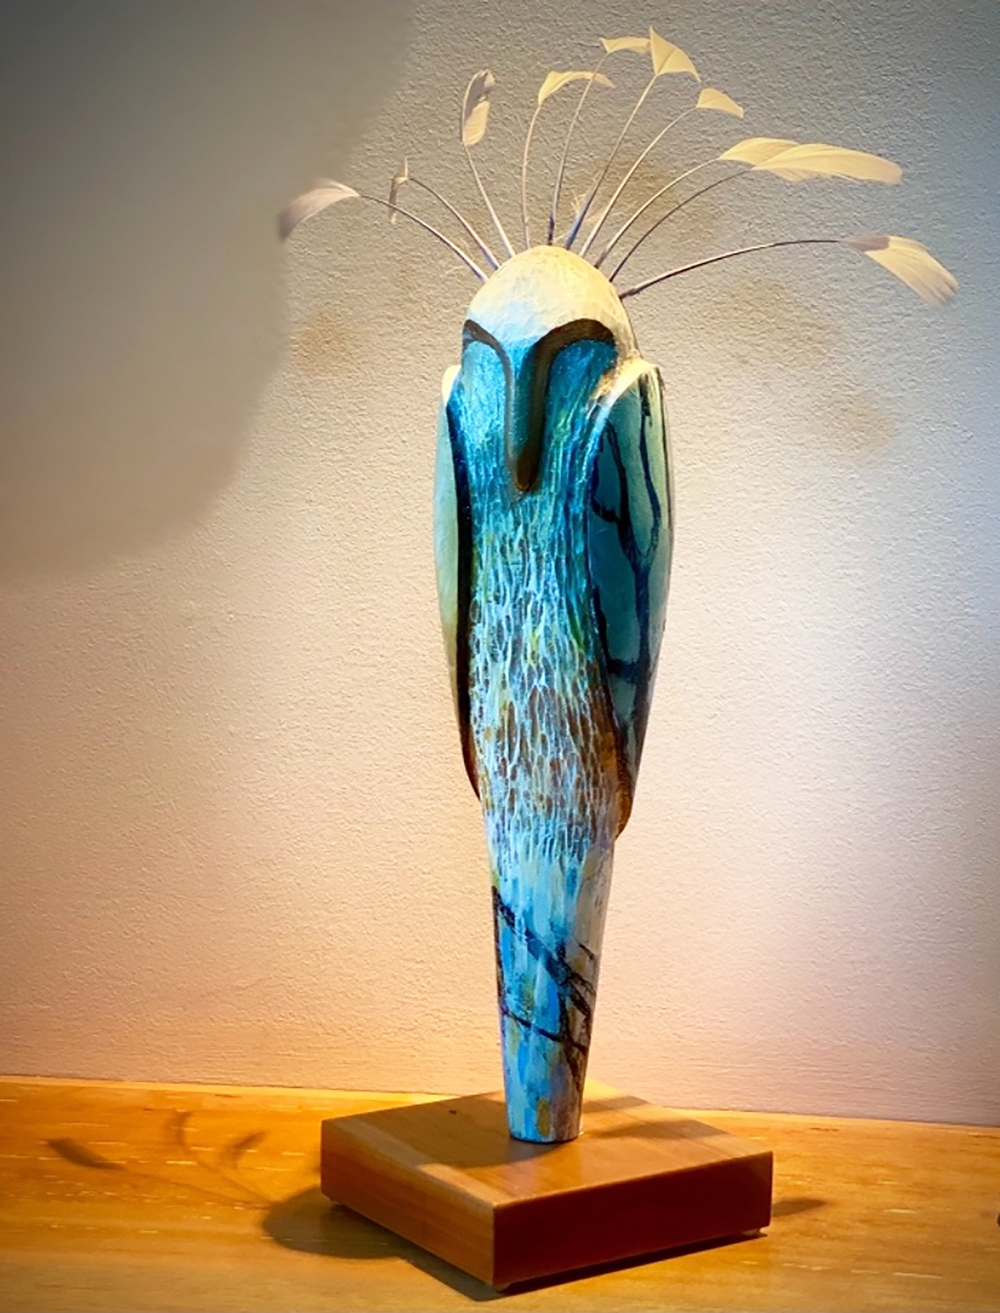 ((The collaborative work of Janet Fagan & Chris Pope will be featured in The Confluence Community Gallery. Forest Dreams is on display from April 30 to June 11.)